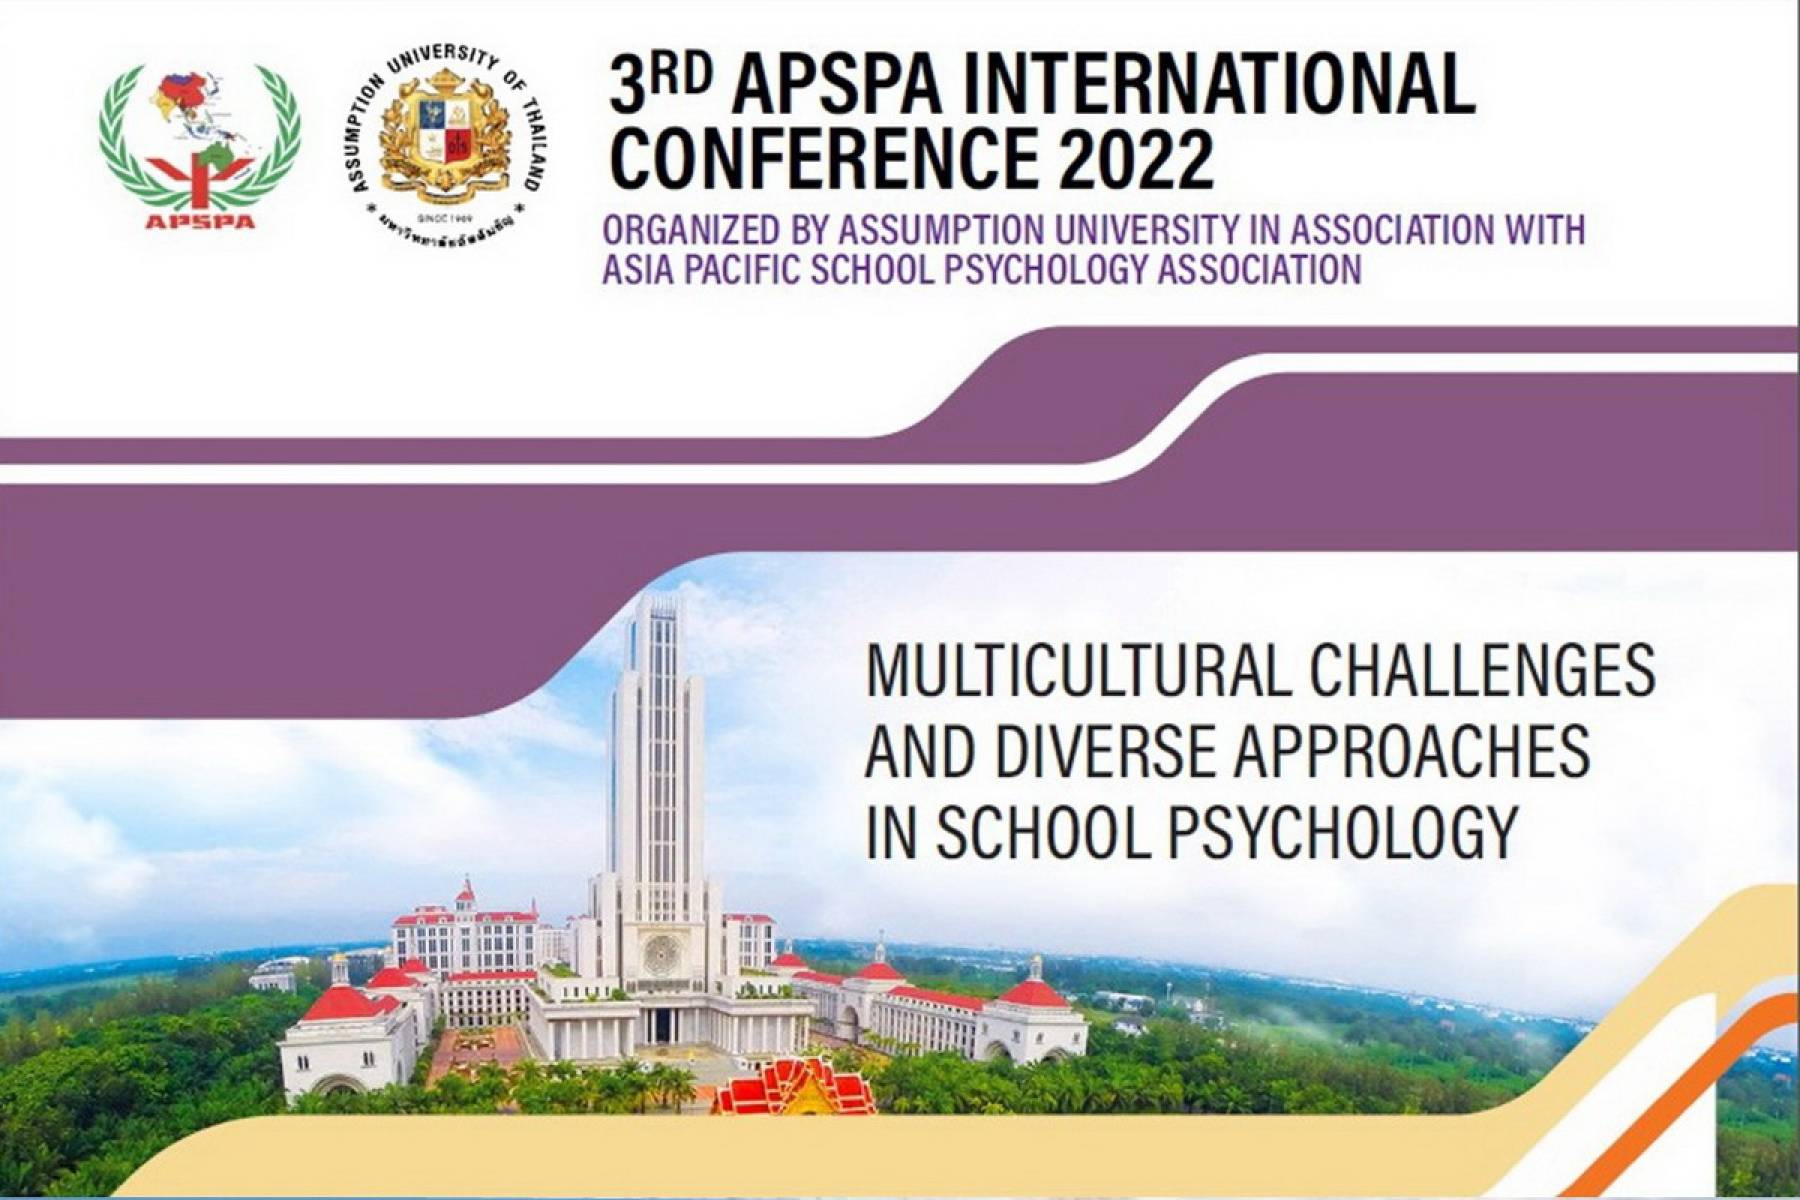 The 3rd APSPA International Conference 2022